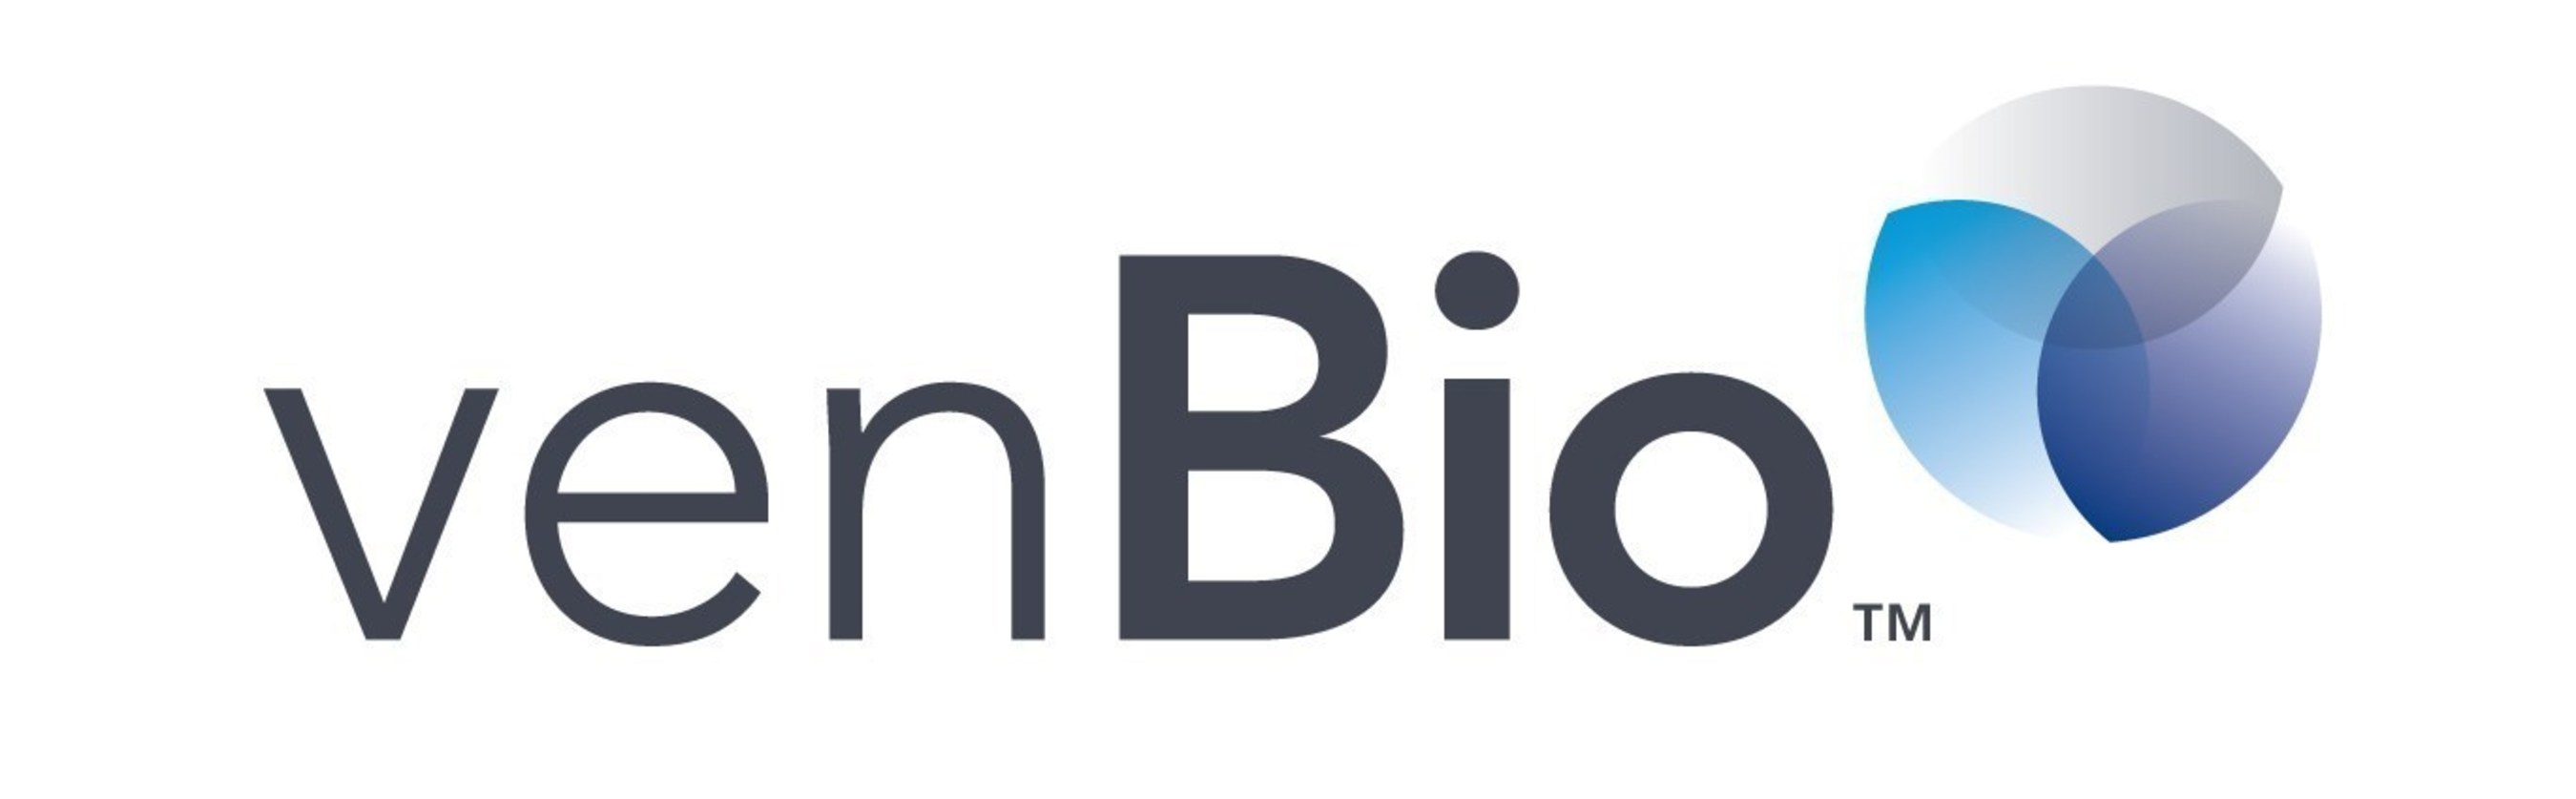 venBio is a life sciences investment firm, partnering with industry leaders to build and invest in game-changing medicines and technologies with a focus on novel therapeutics for unmet medical needs